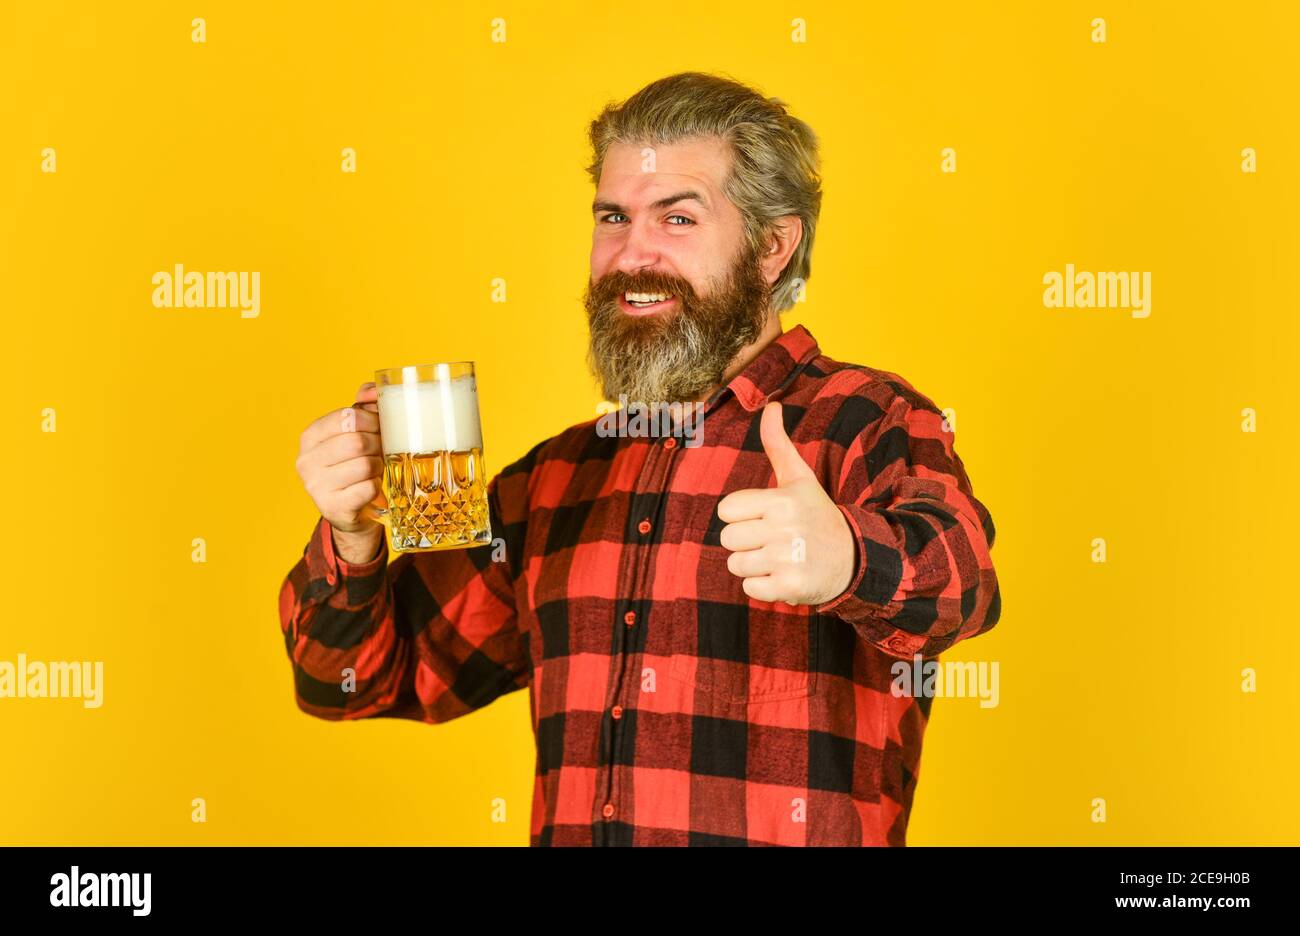 craft beer. Man drinking in pub bar. Beer with foam. brutal hipster drink beer. mature bearded barman hold beer glass. confident bartender raising toast. leisure and celebration. Stock Photo